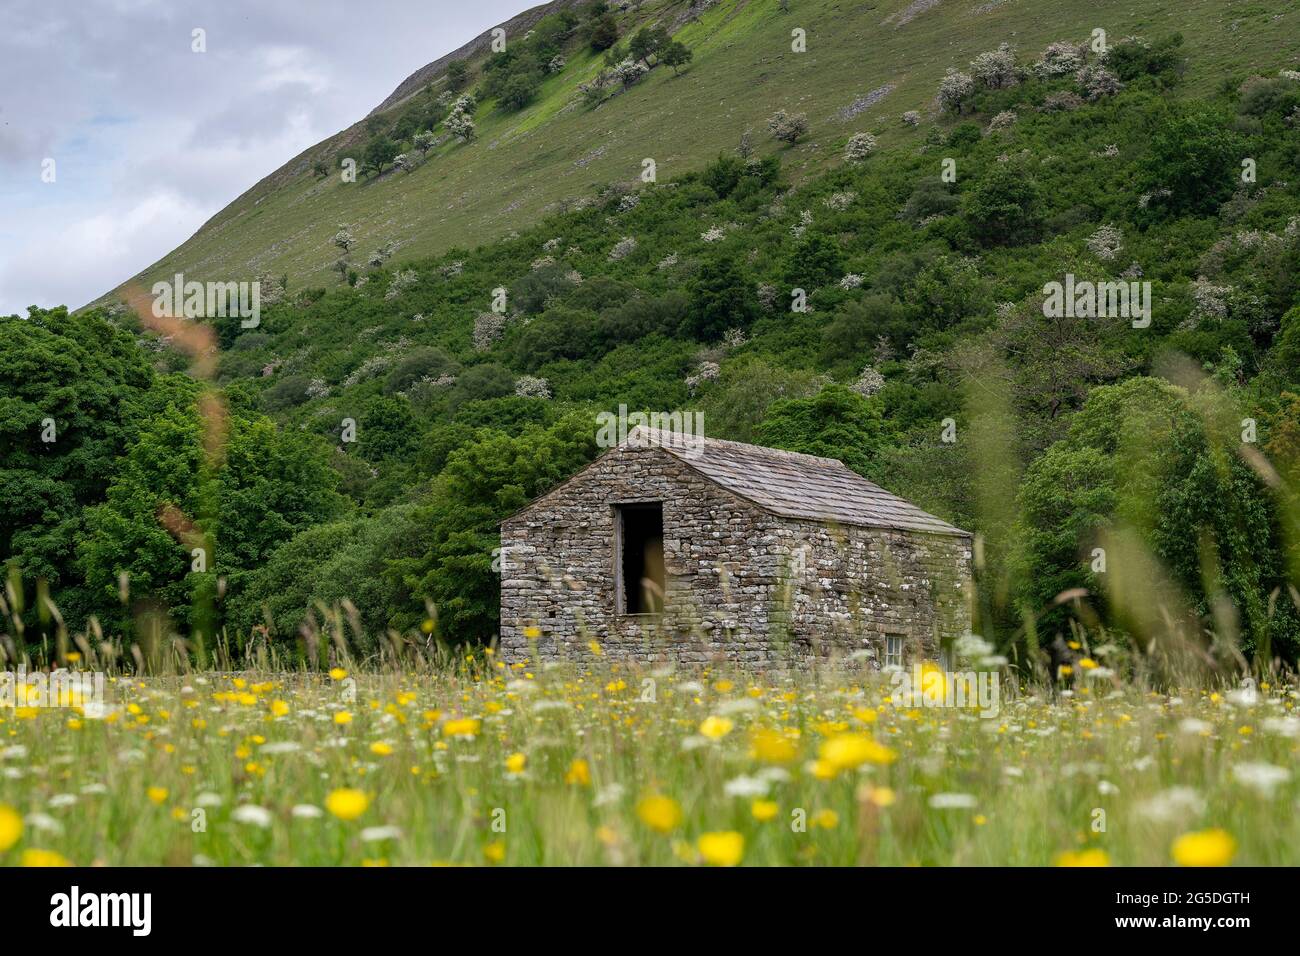 Old traditional stone barn in the middle of a wildflower meadow, Muker, Swaledale, North Yorkshire, UK. Stock Photo